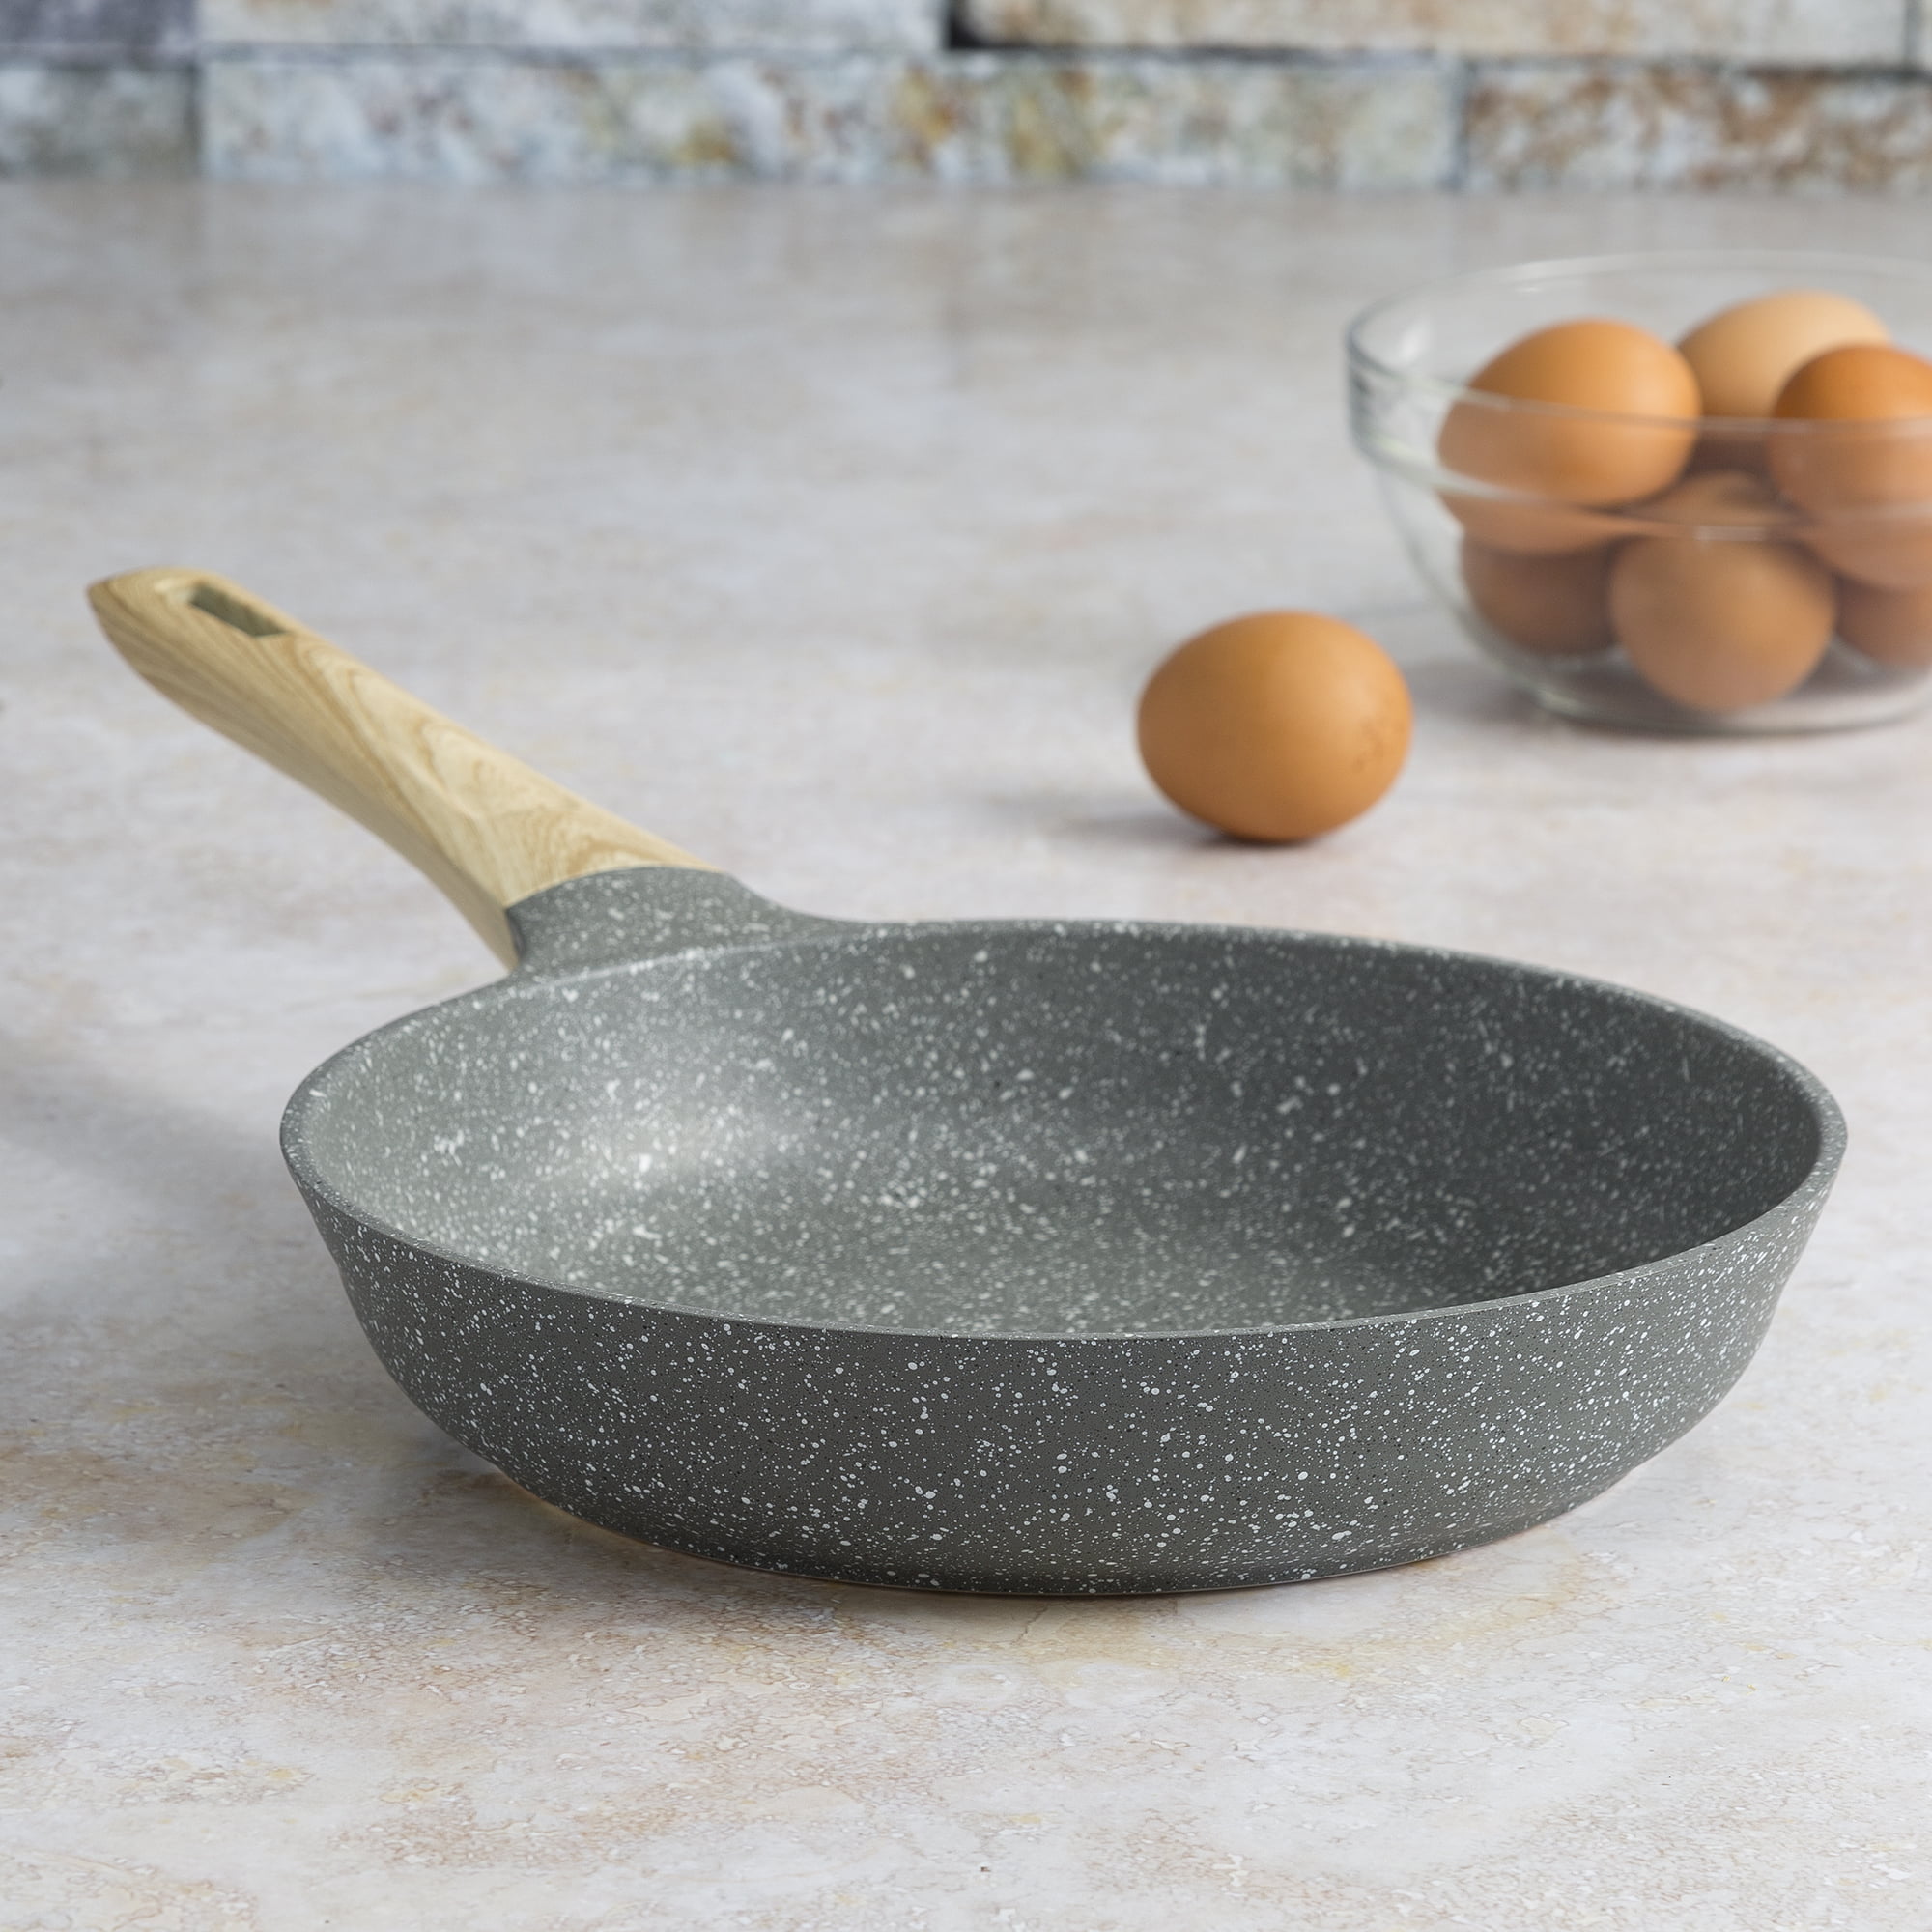 Ecolution Symphony 9.5 in. Aluminum Nonstick Frying Pan in Slate